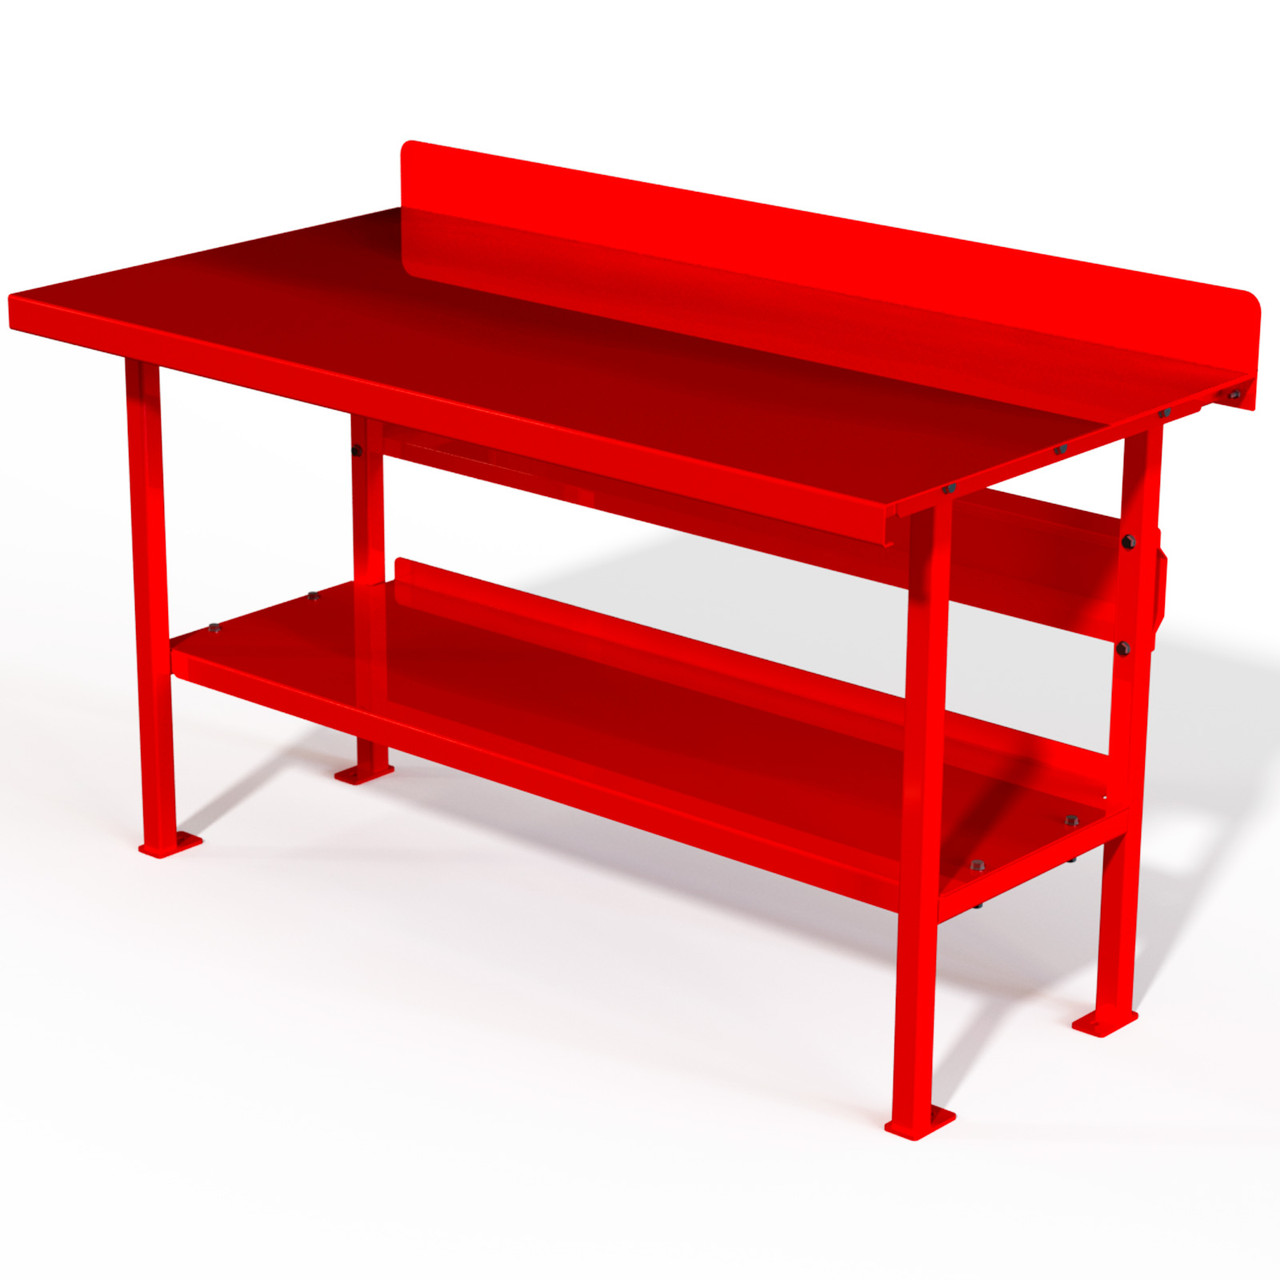 WB-100 - Heavy Duty Automotive Work Bench from QSP | McBay Performance